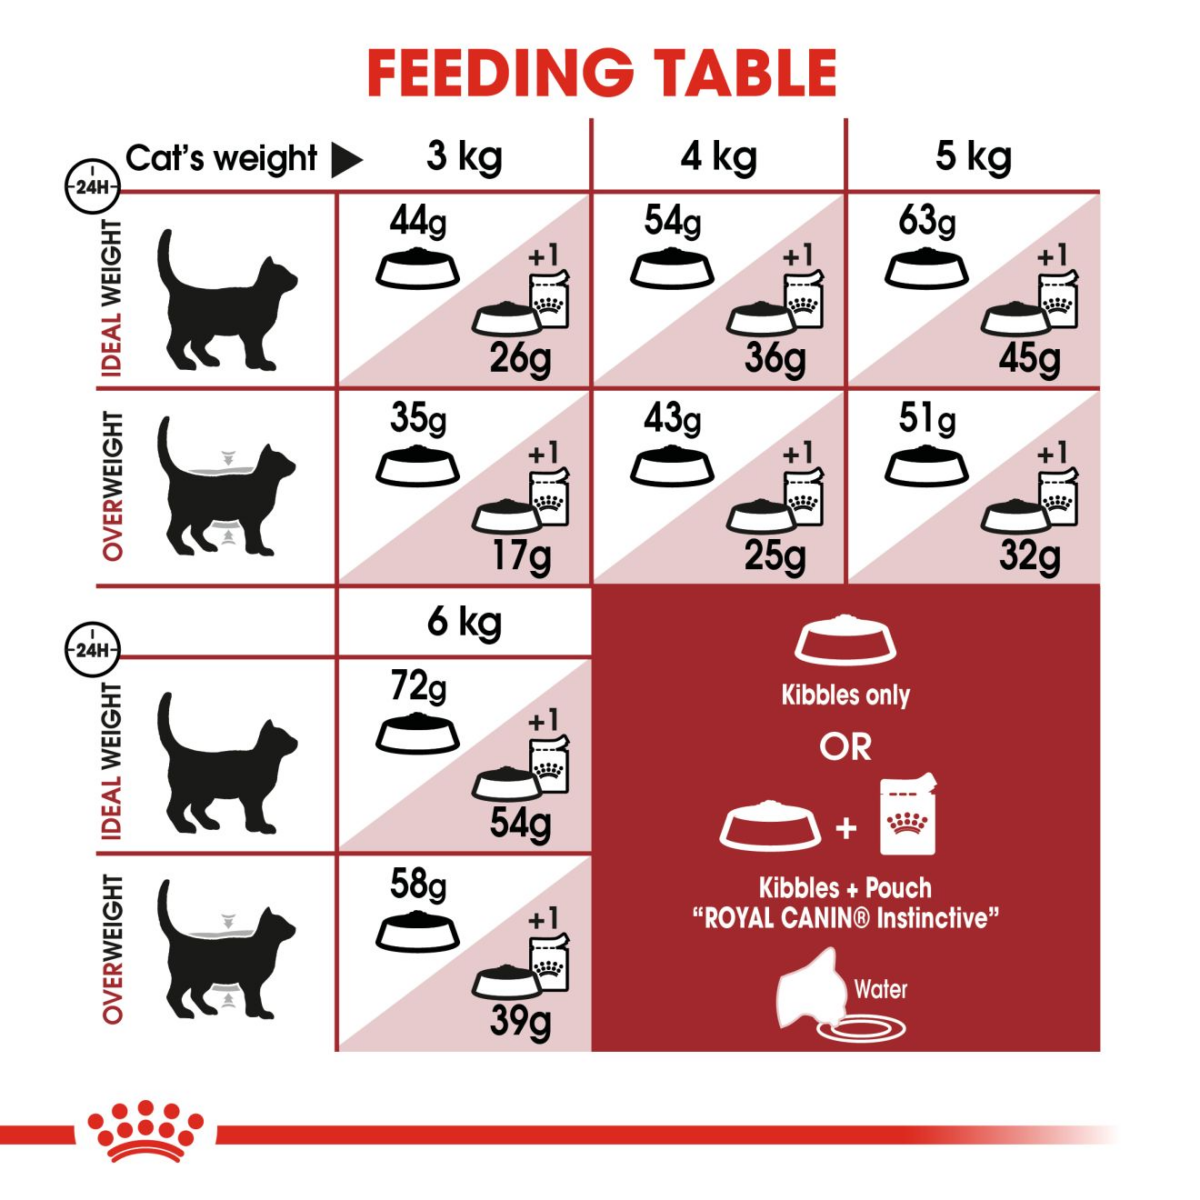 Royal Canin Nutrition Fit 32 Dry Cat Food